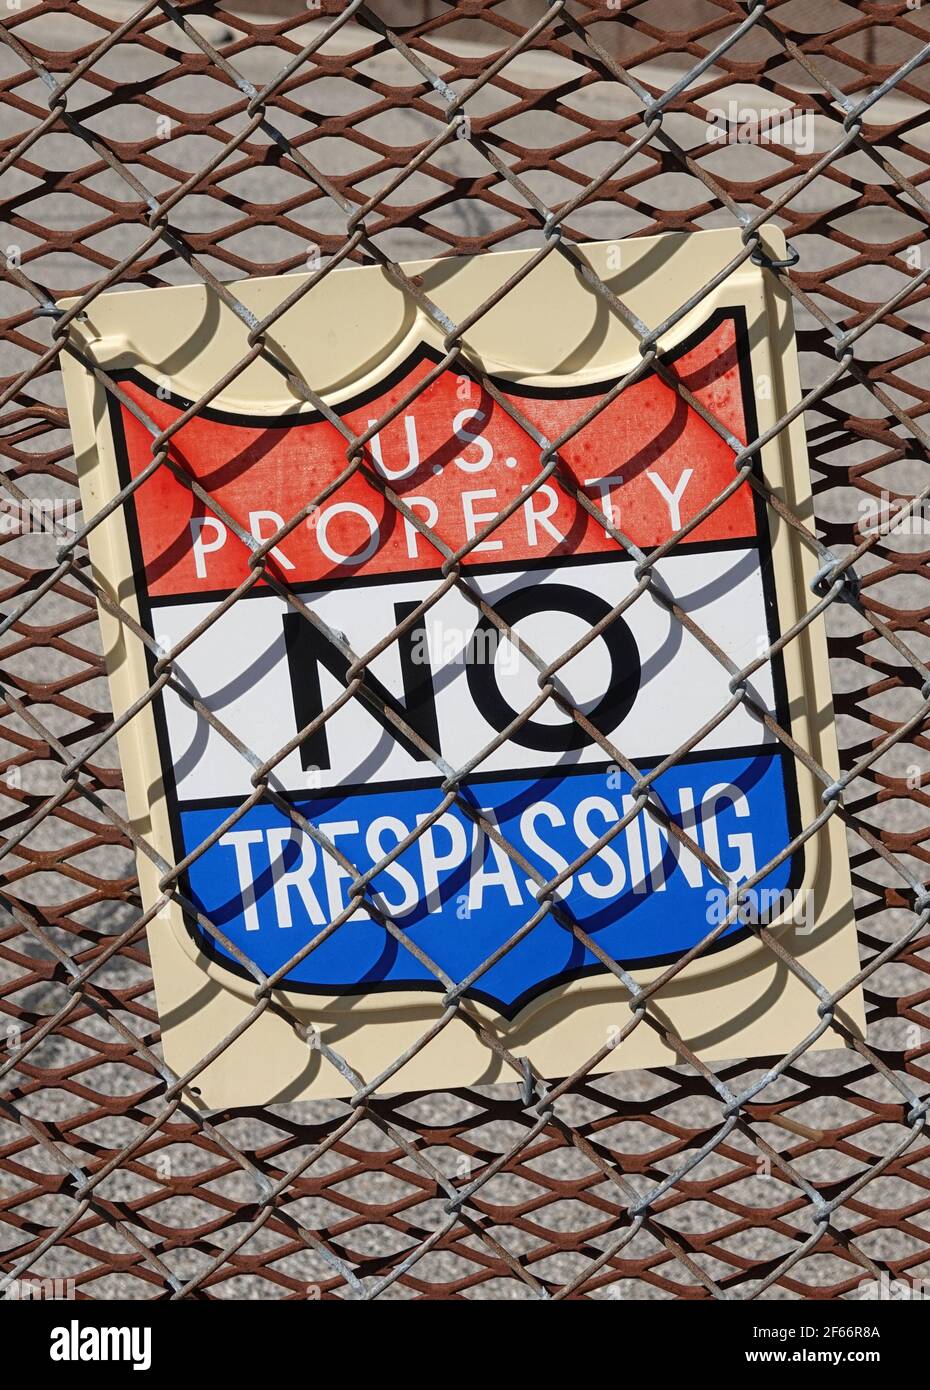 A sign reading U.S. PROPERTY NO TRESPASSING is shown between two metal security fences during the day in a vertical view. Stock Photo